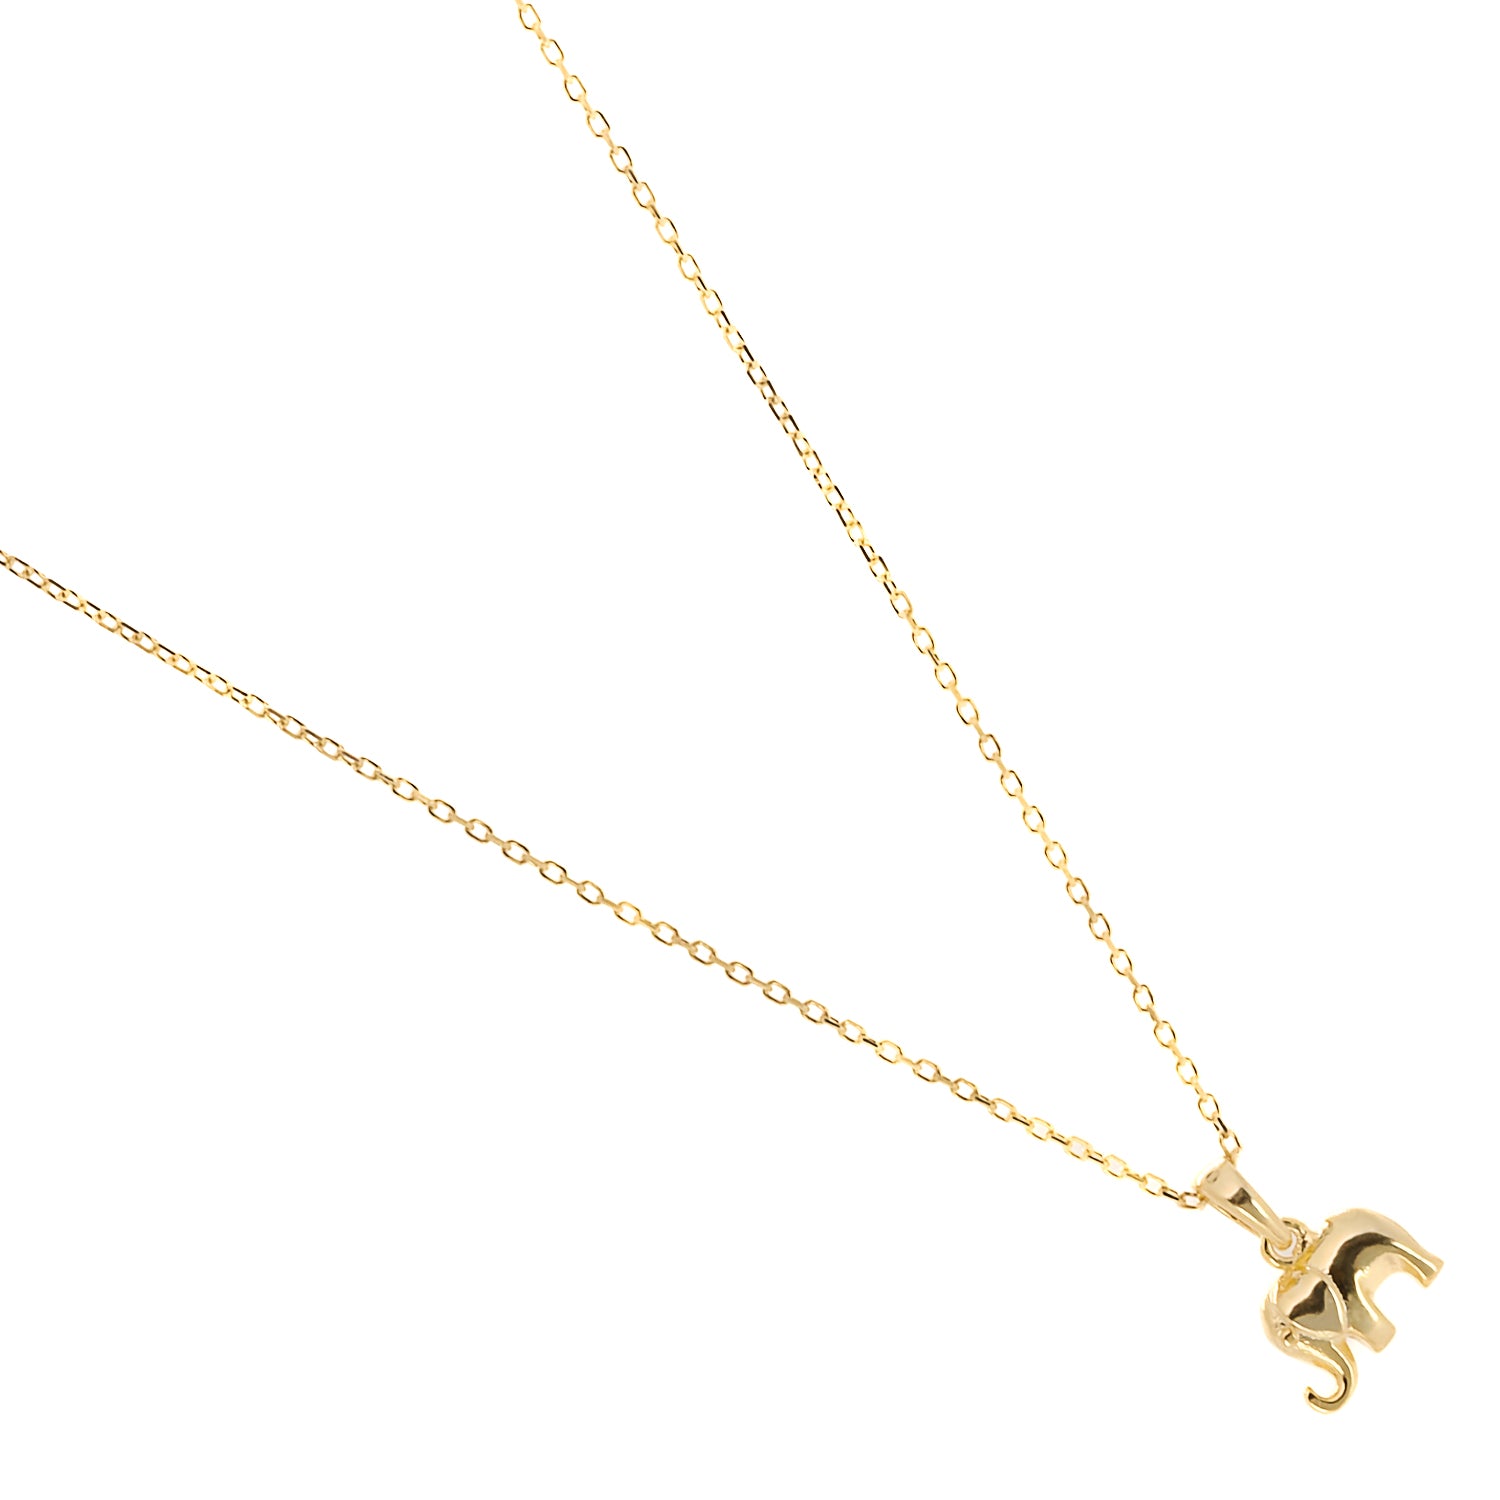 A full-length view of the Dainty Gold Elephant Necklace, demonstrating how it beautifully accents the neckline and adds a touch of elegance to the wearer.